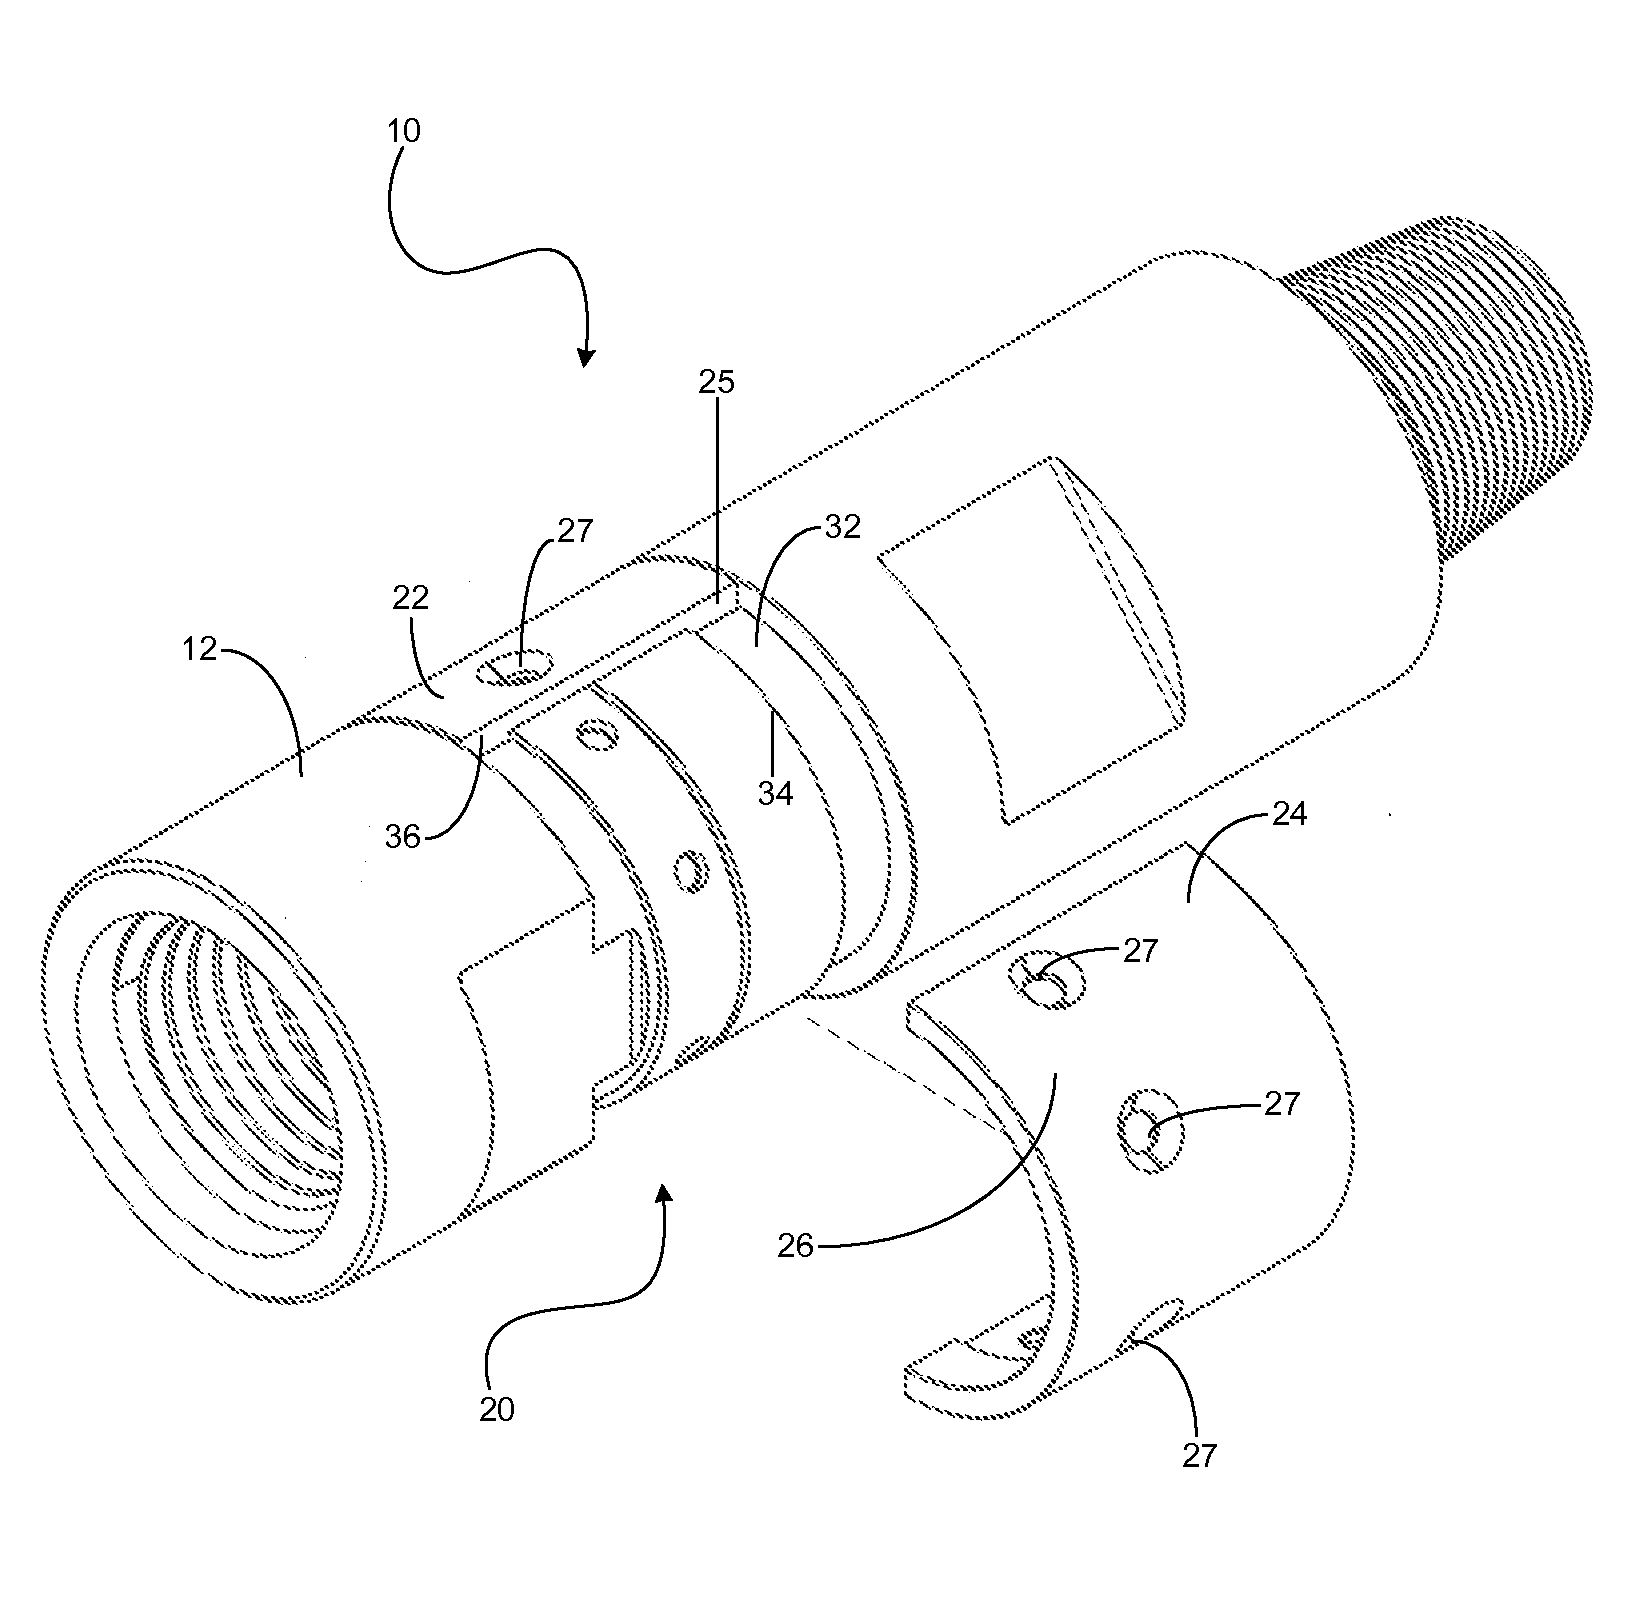 Retaining arrangement, sub adaptor and/or drill spindle